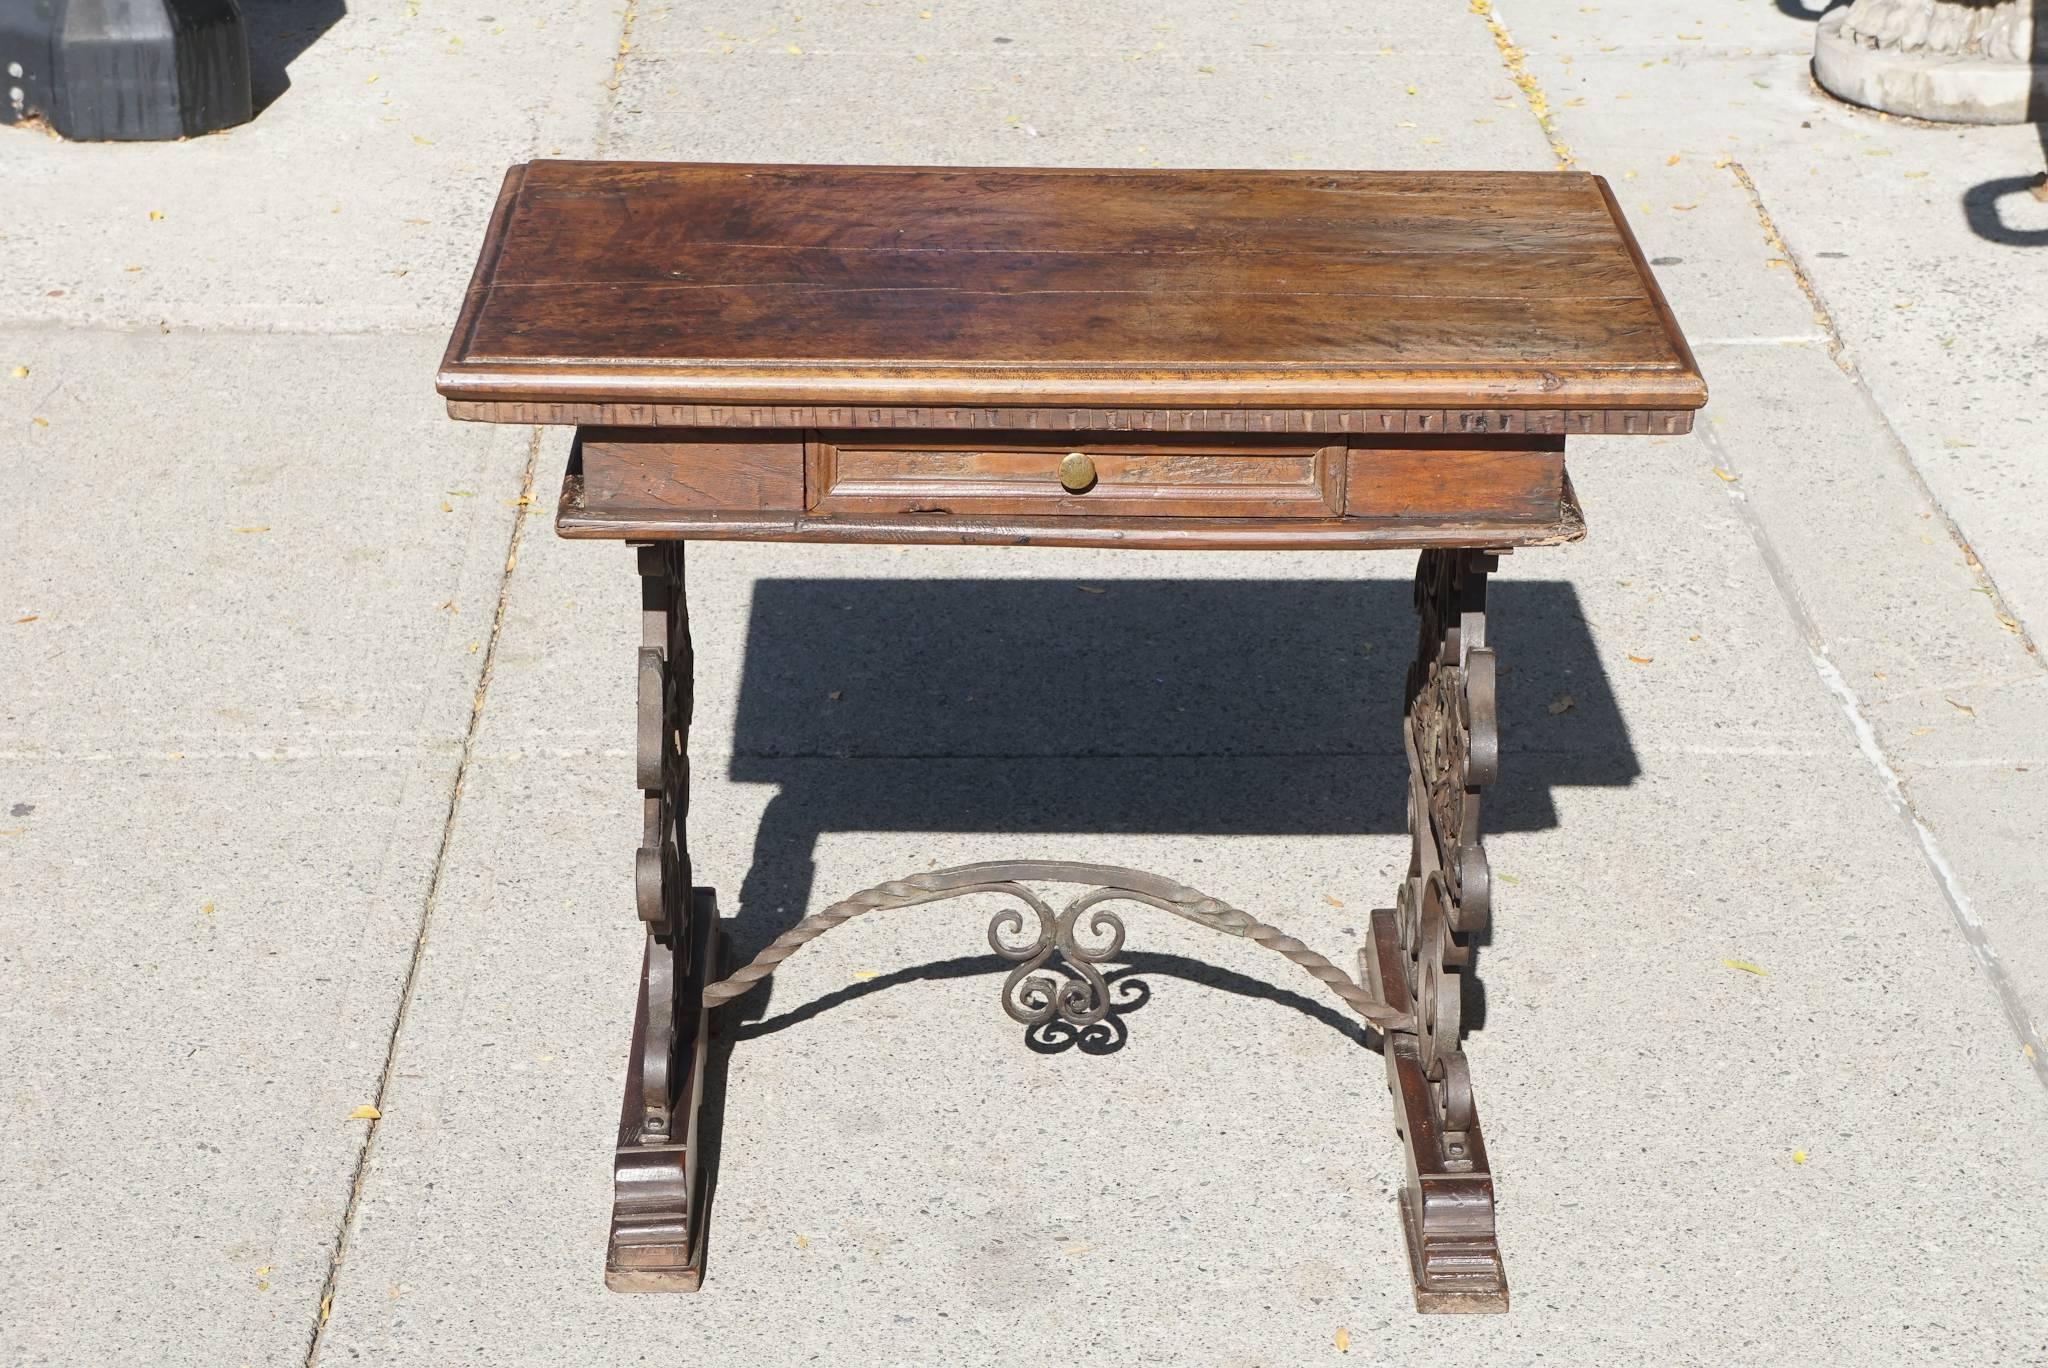 This nice low table crafted from thick walnut and iron is Italian and made, circa 1890. The table is in the style of the Renaissance but was made to satisfy the growing late 19th century resurgence of that periods artistic flourishing and the